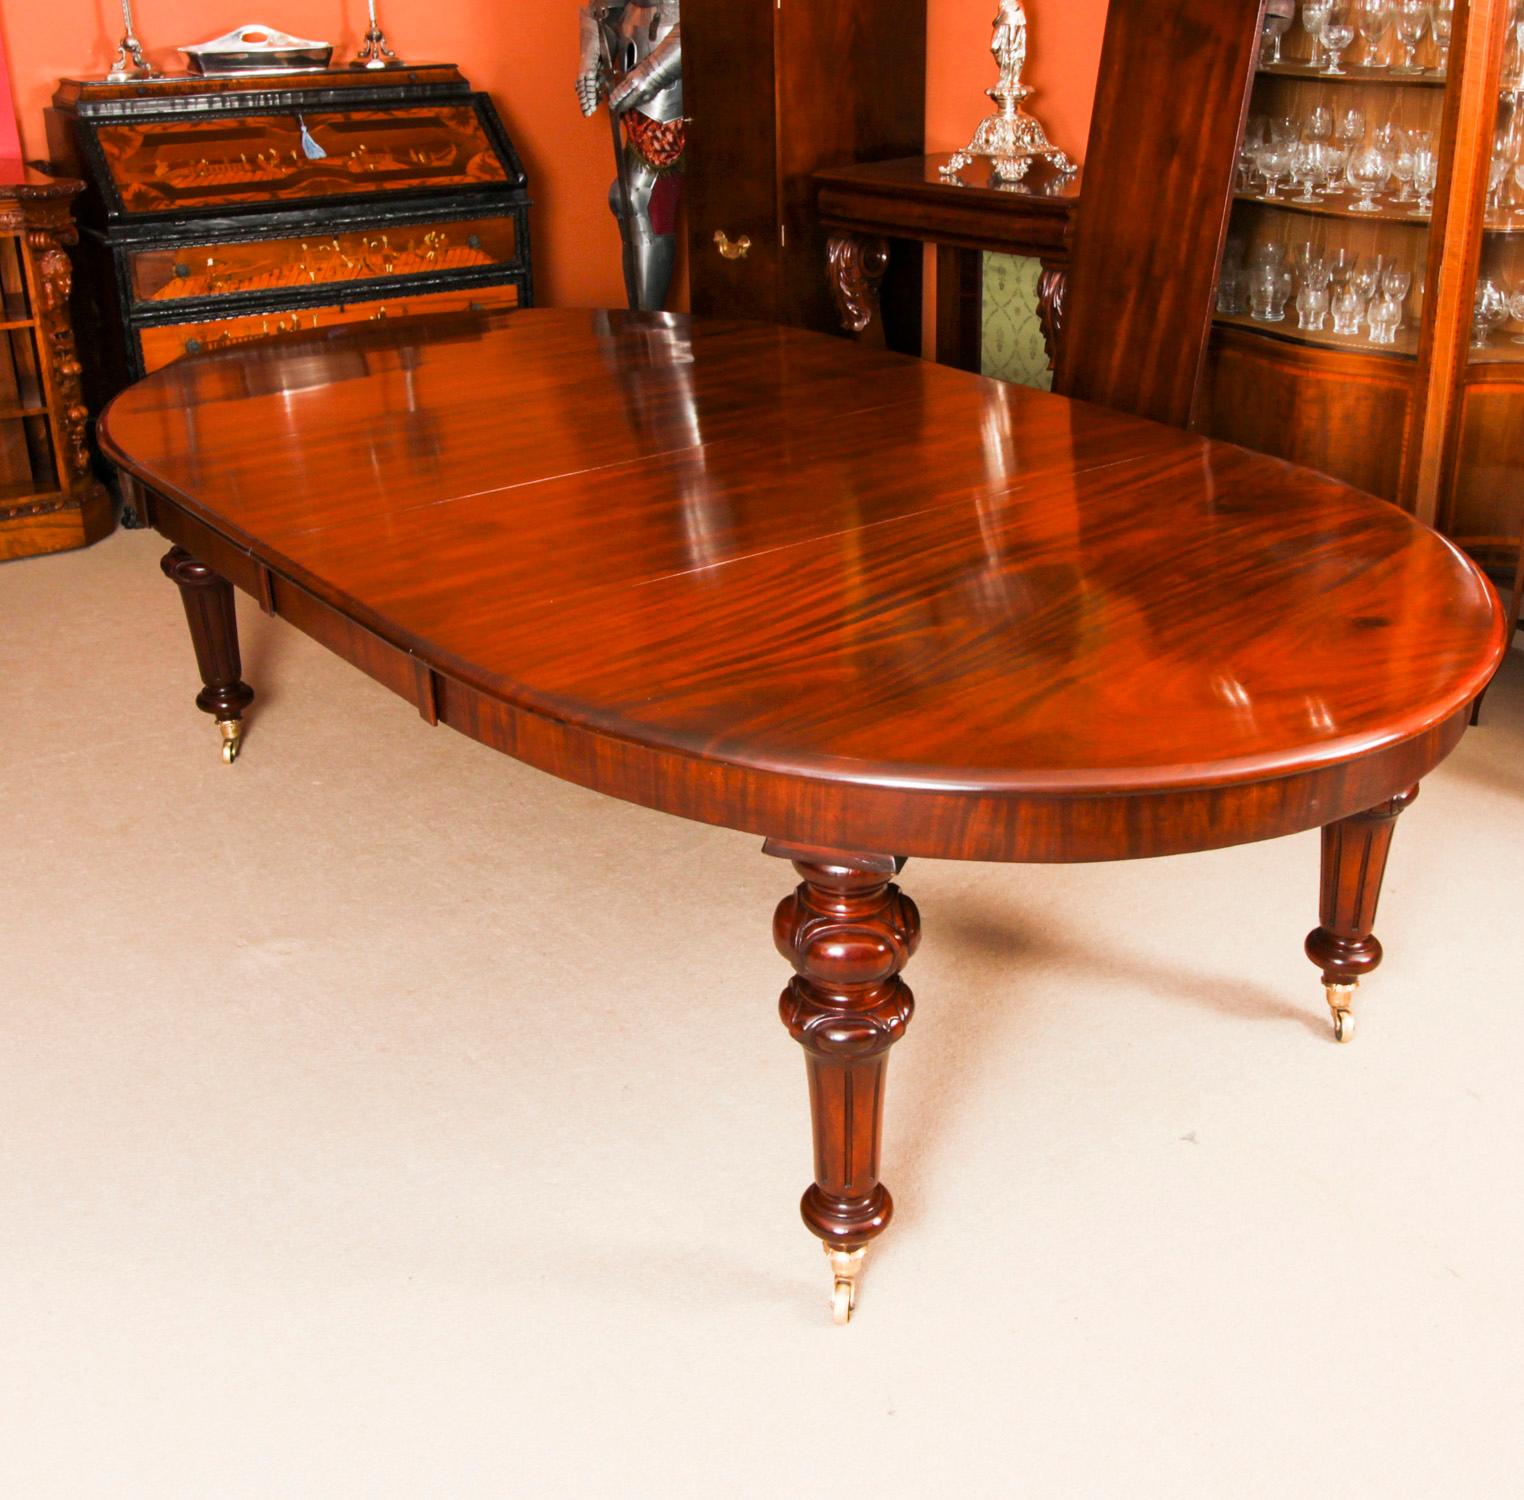 Mid-19th Century Antique Victorian Oval Flame Mahogany Extending Dining Table 19thC